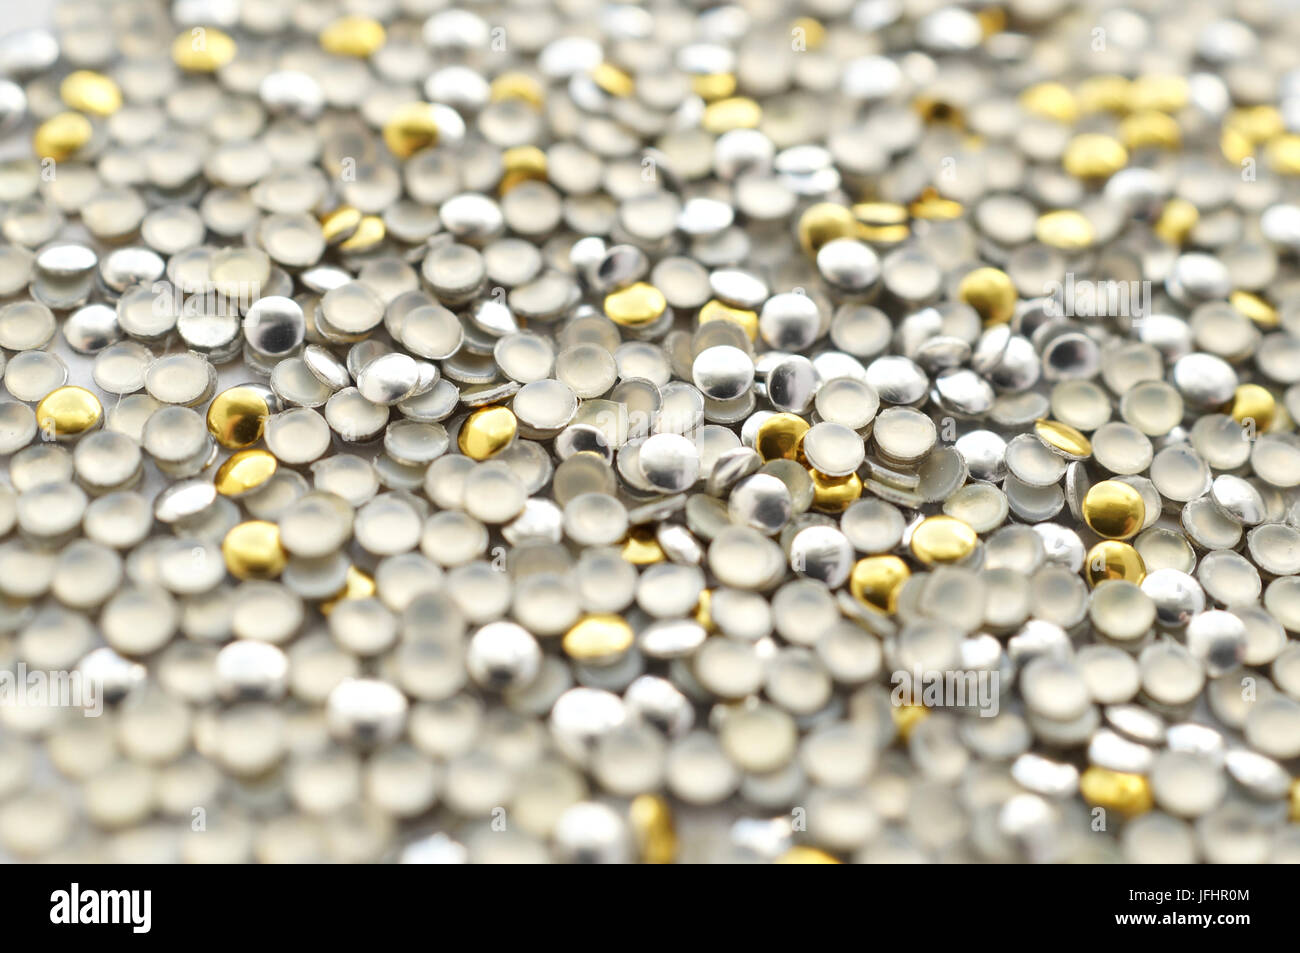 Mix of metal gold and silver thermo-adhesive rhinestones Stock Photo